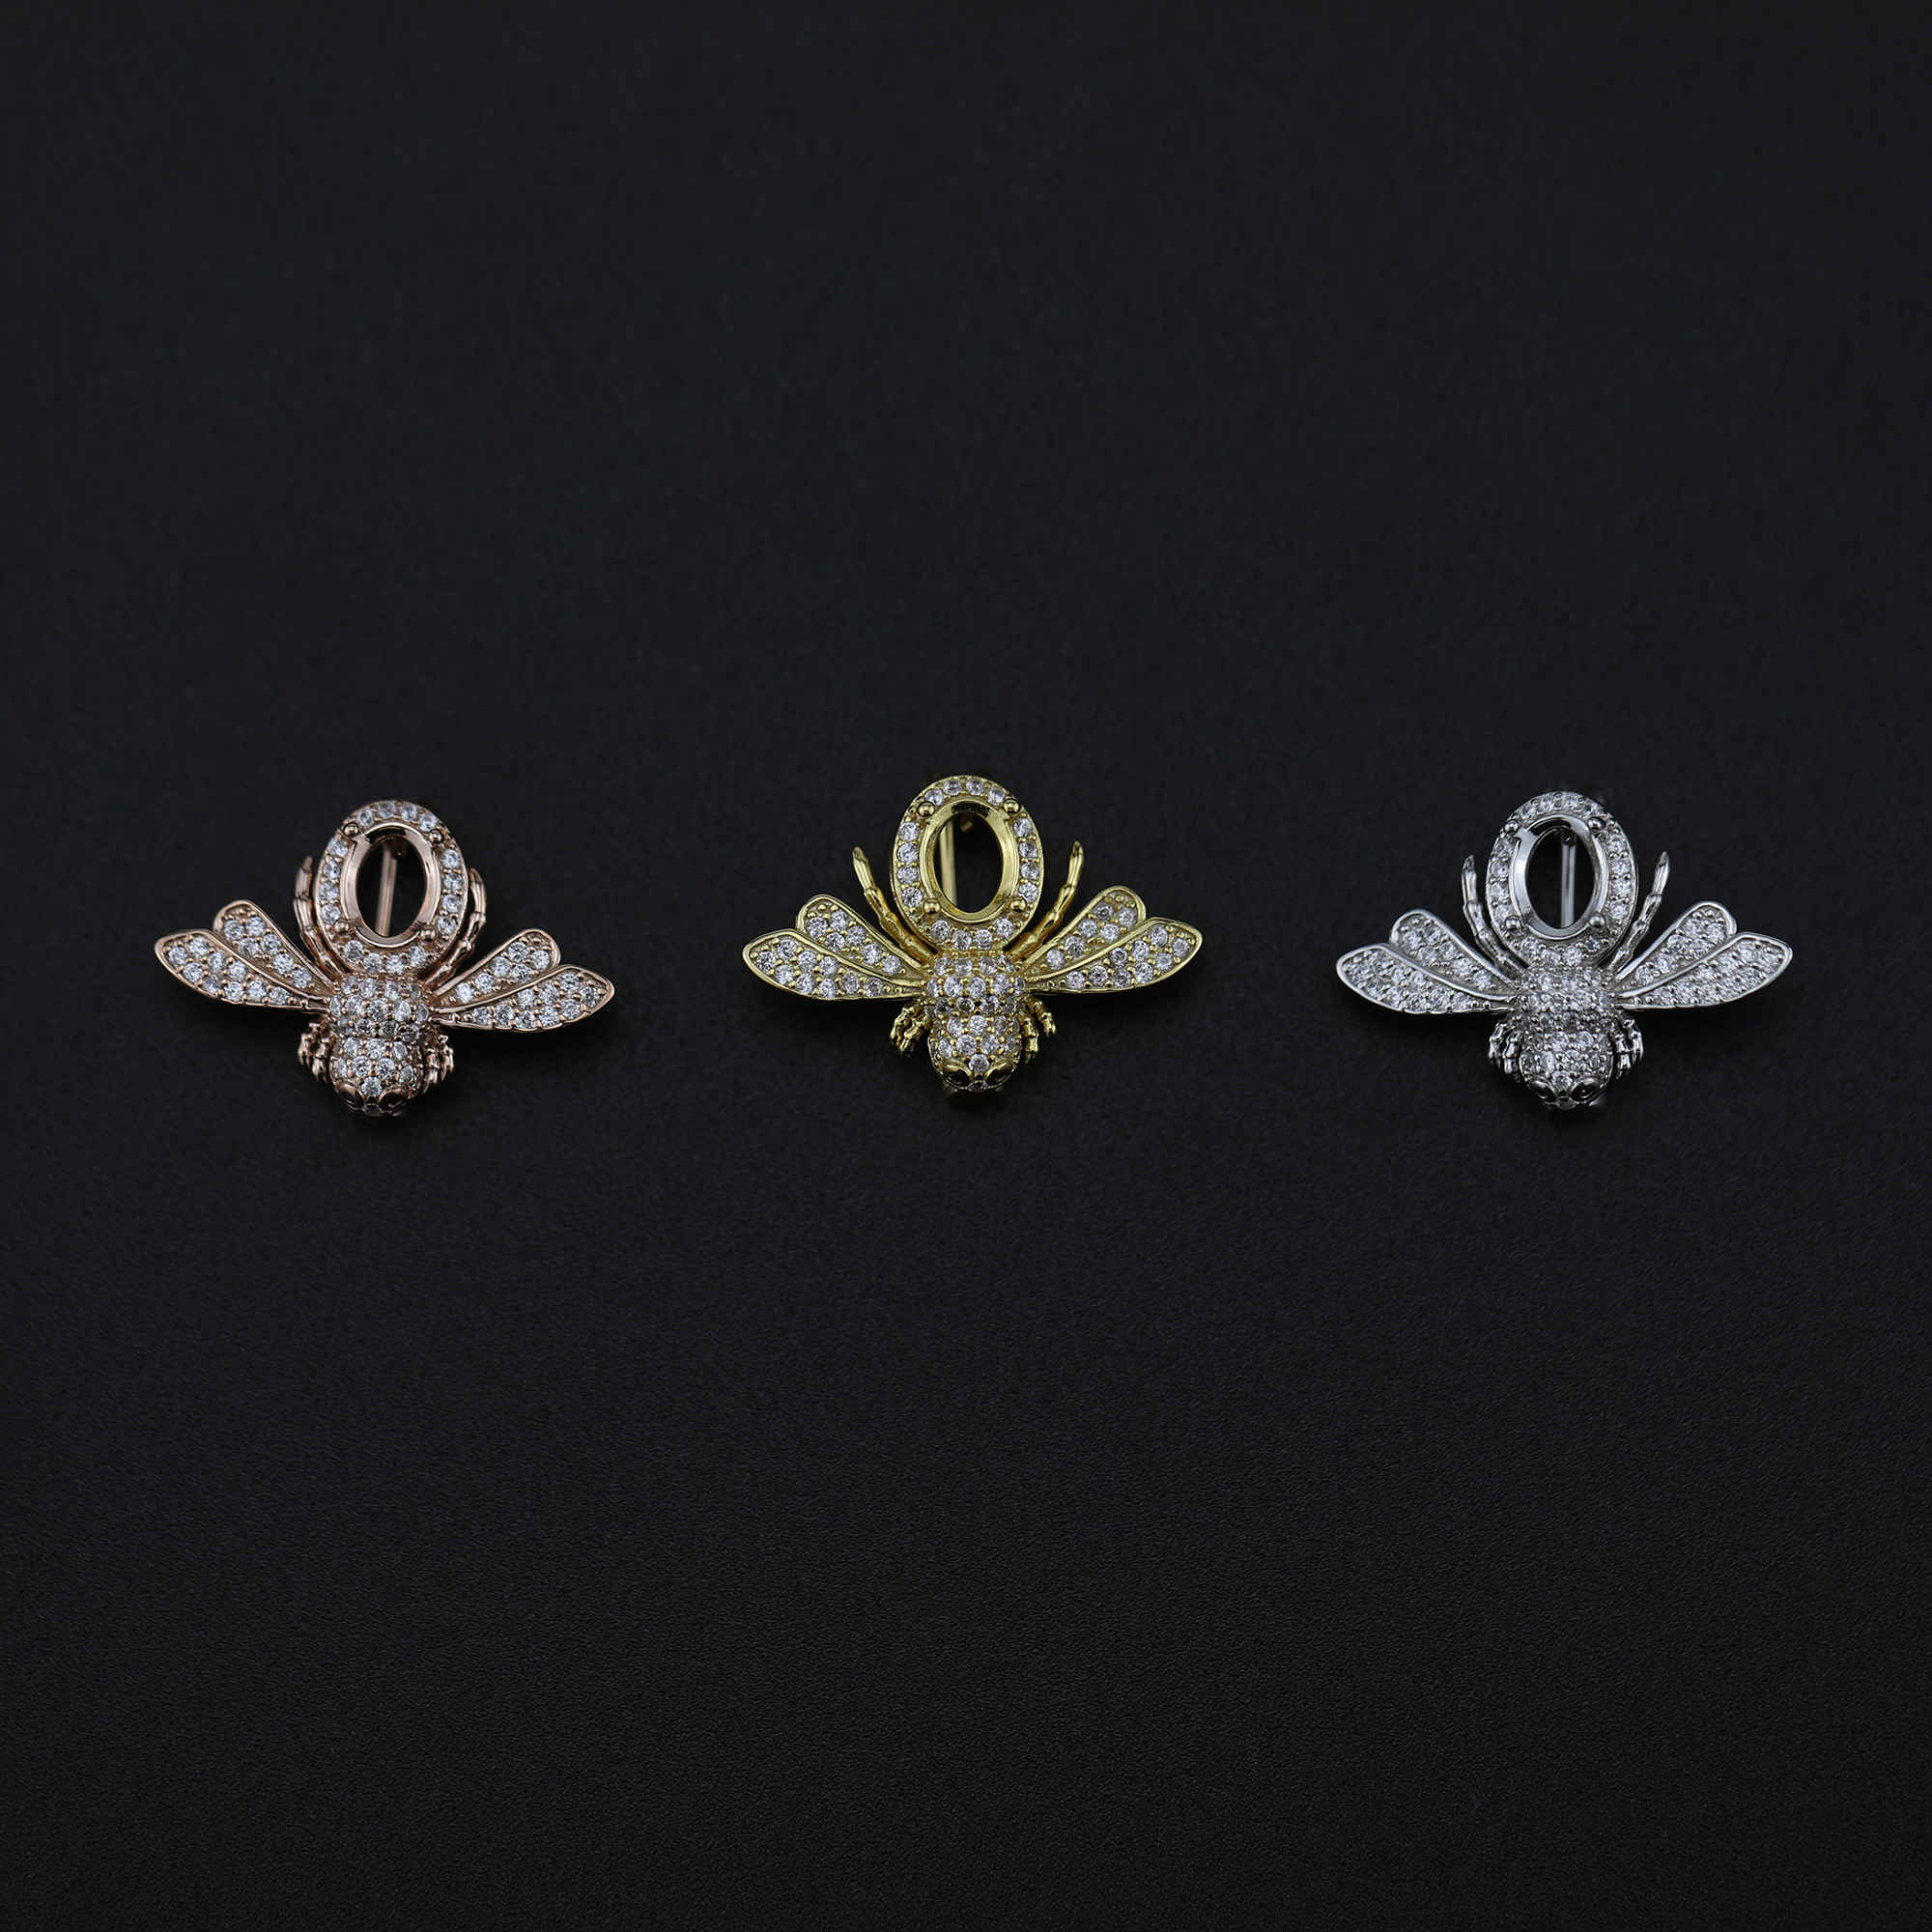 1Pcs 4x6MM Oval Prong Pendant Settings Rose Gold Solid 925 Sterling Silver Dragonfly Brooch DIY Supplies 1582056 - Click Image to Close